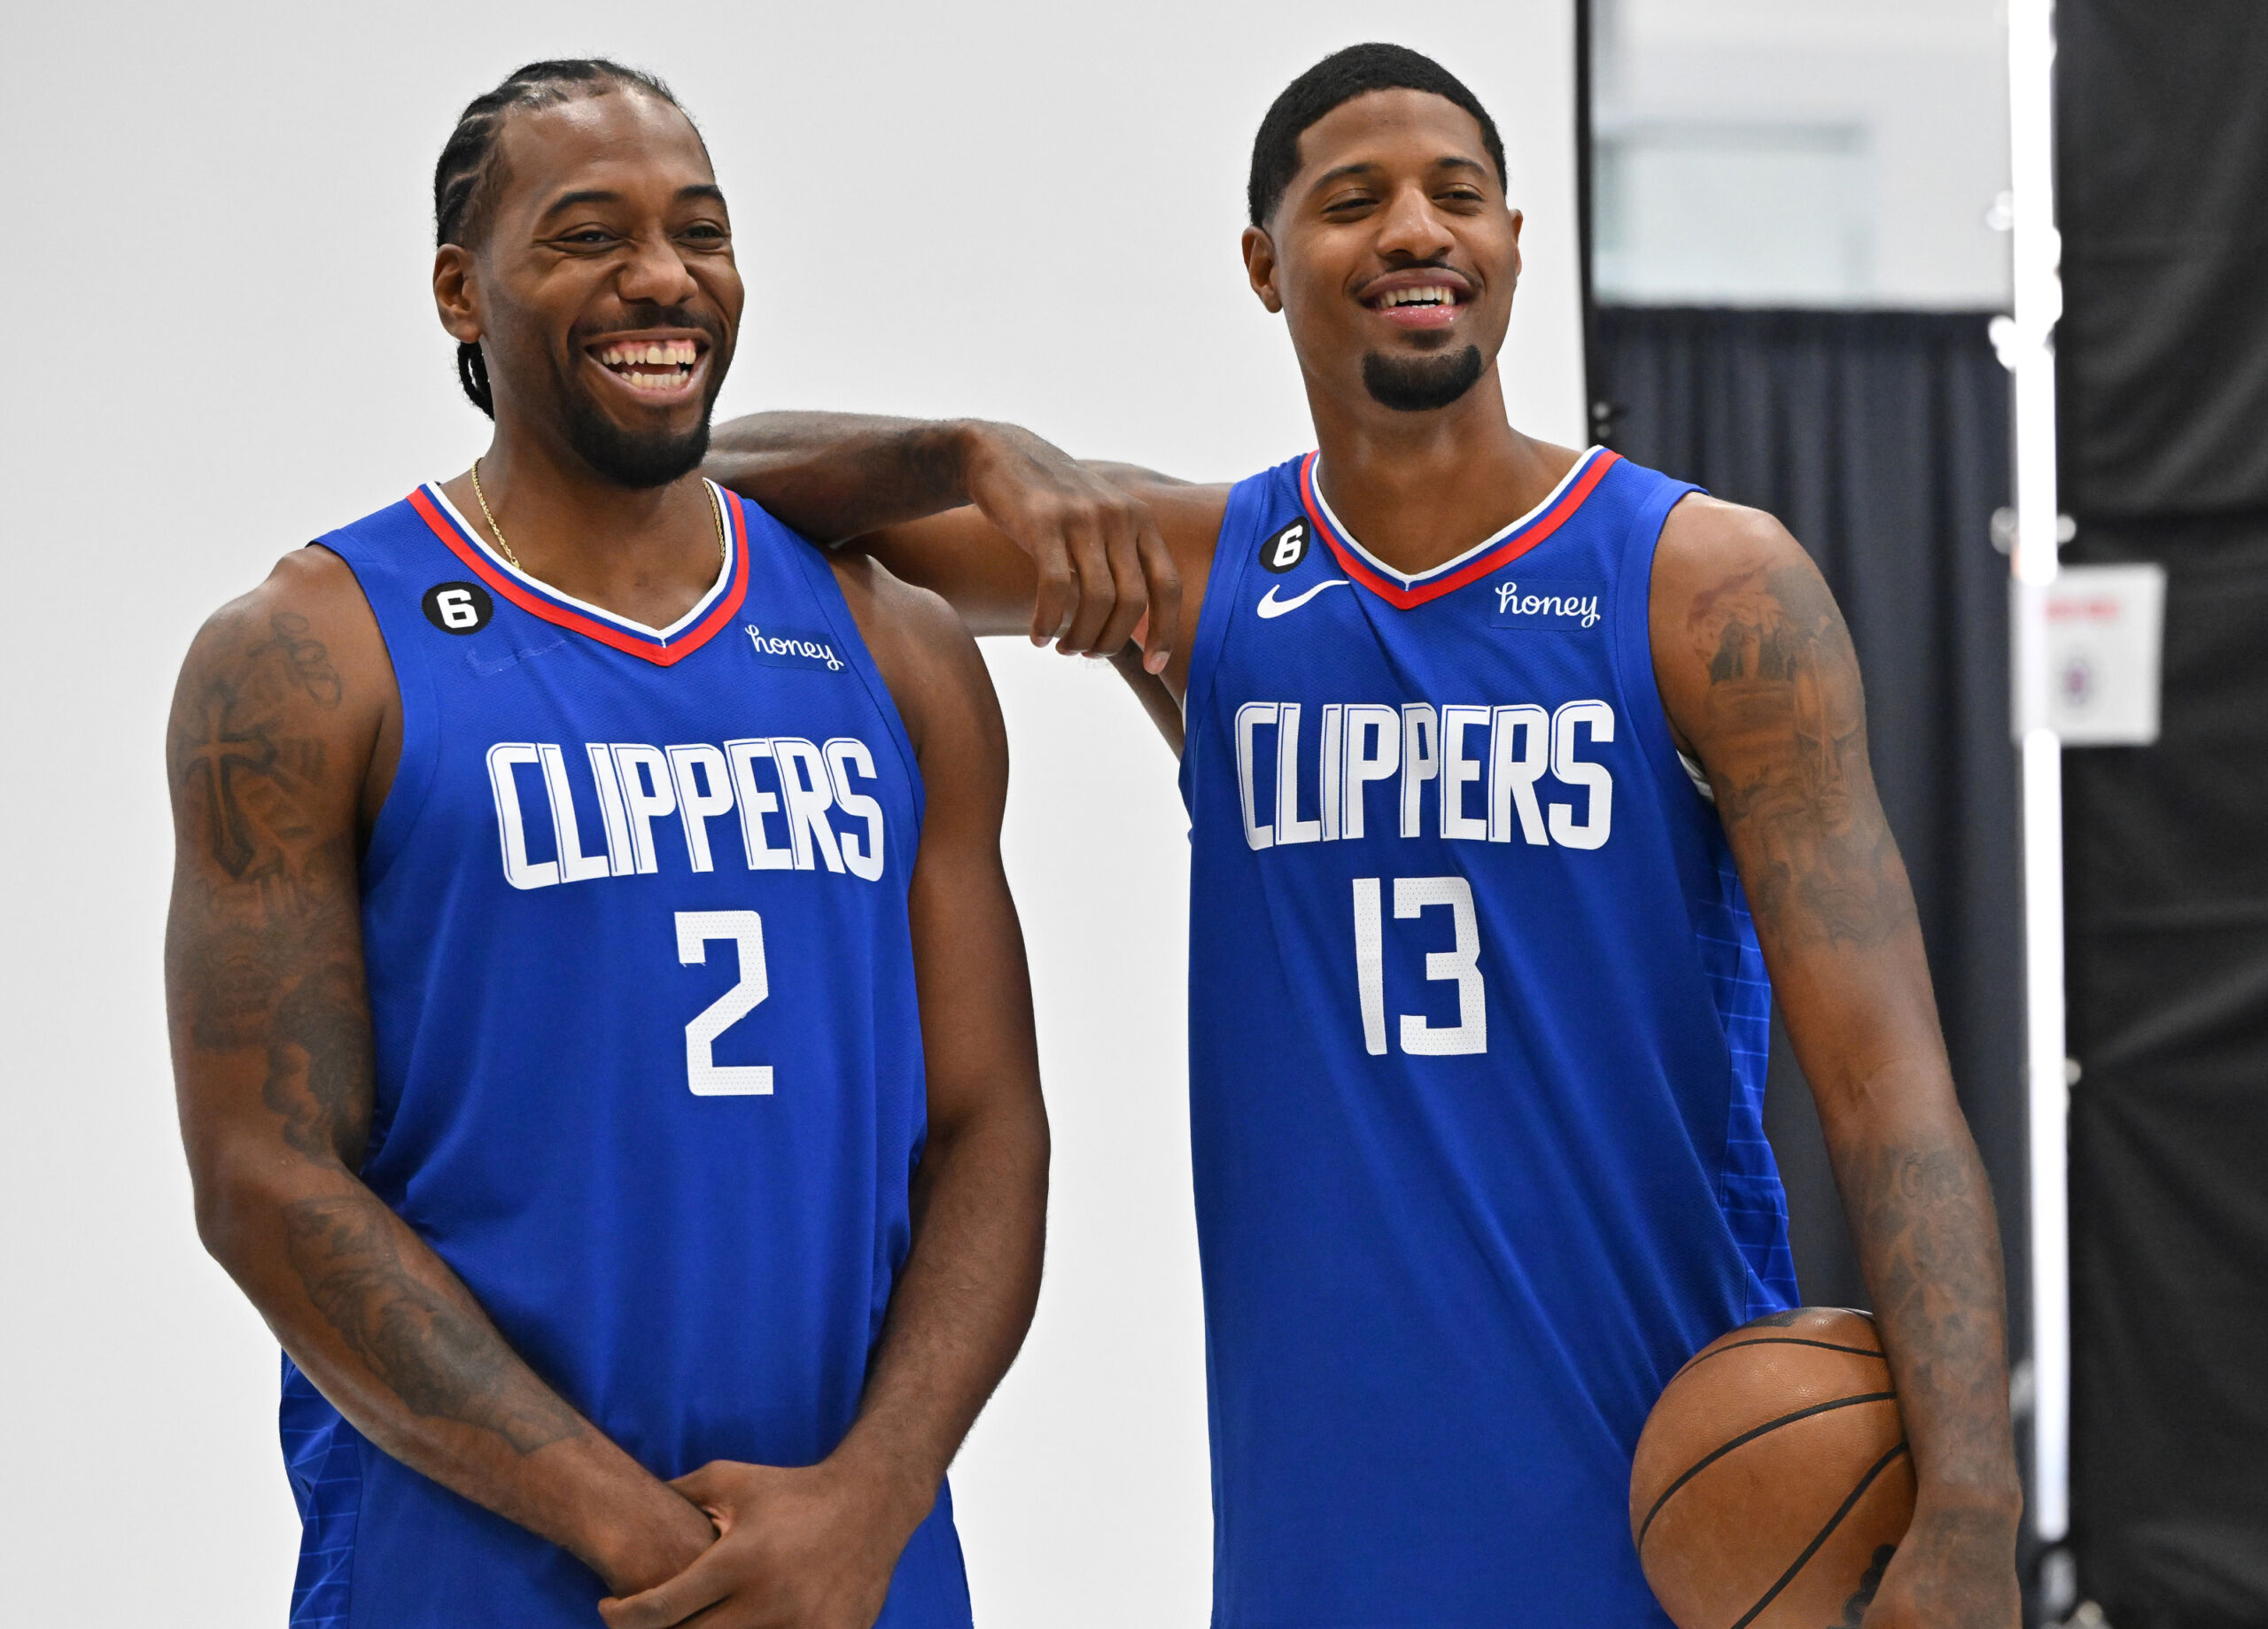 5 Trades Clippers should make to split up Kawhi Leonard and Paul George